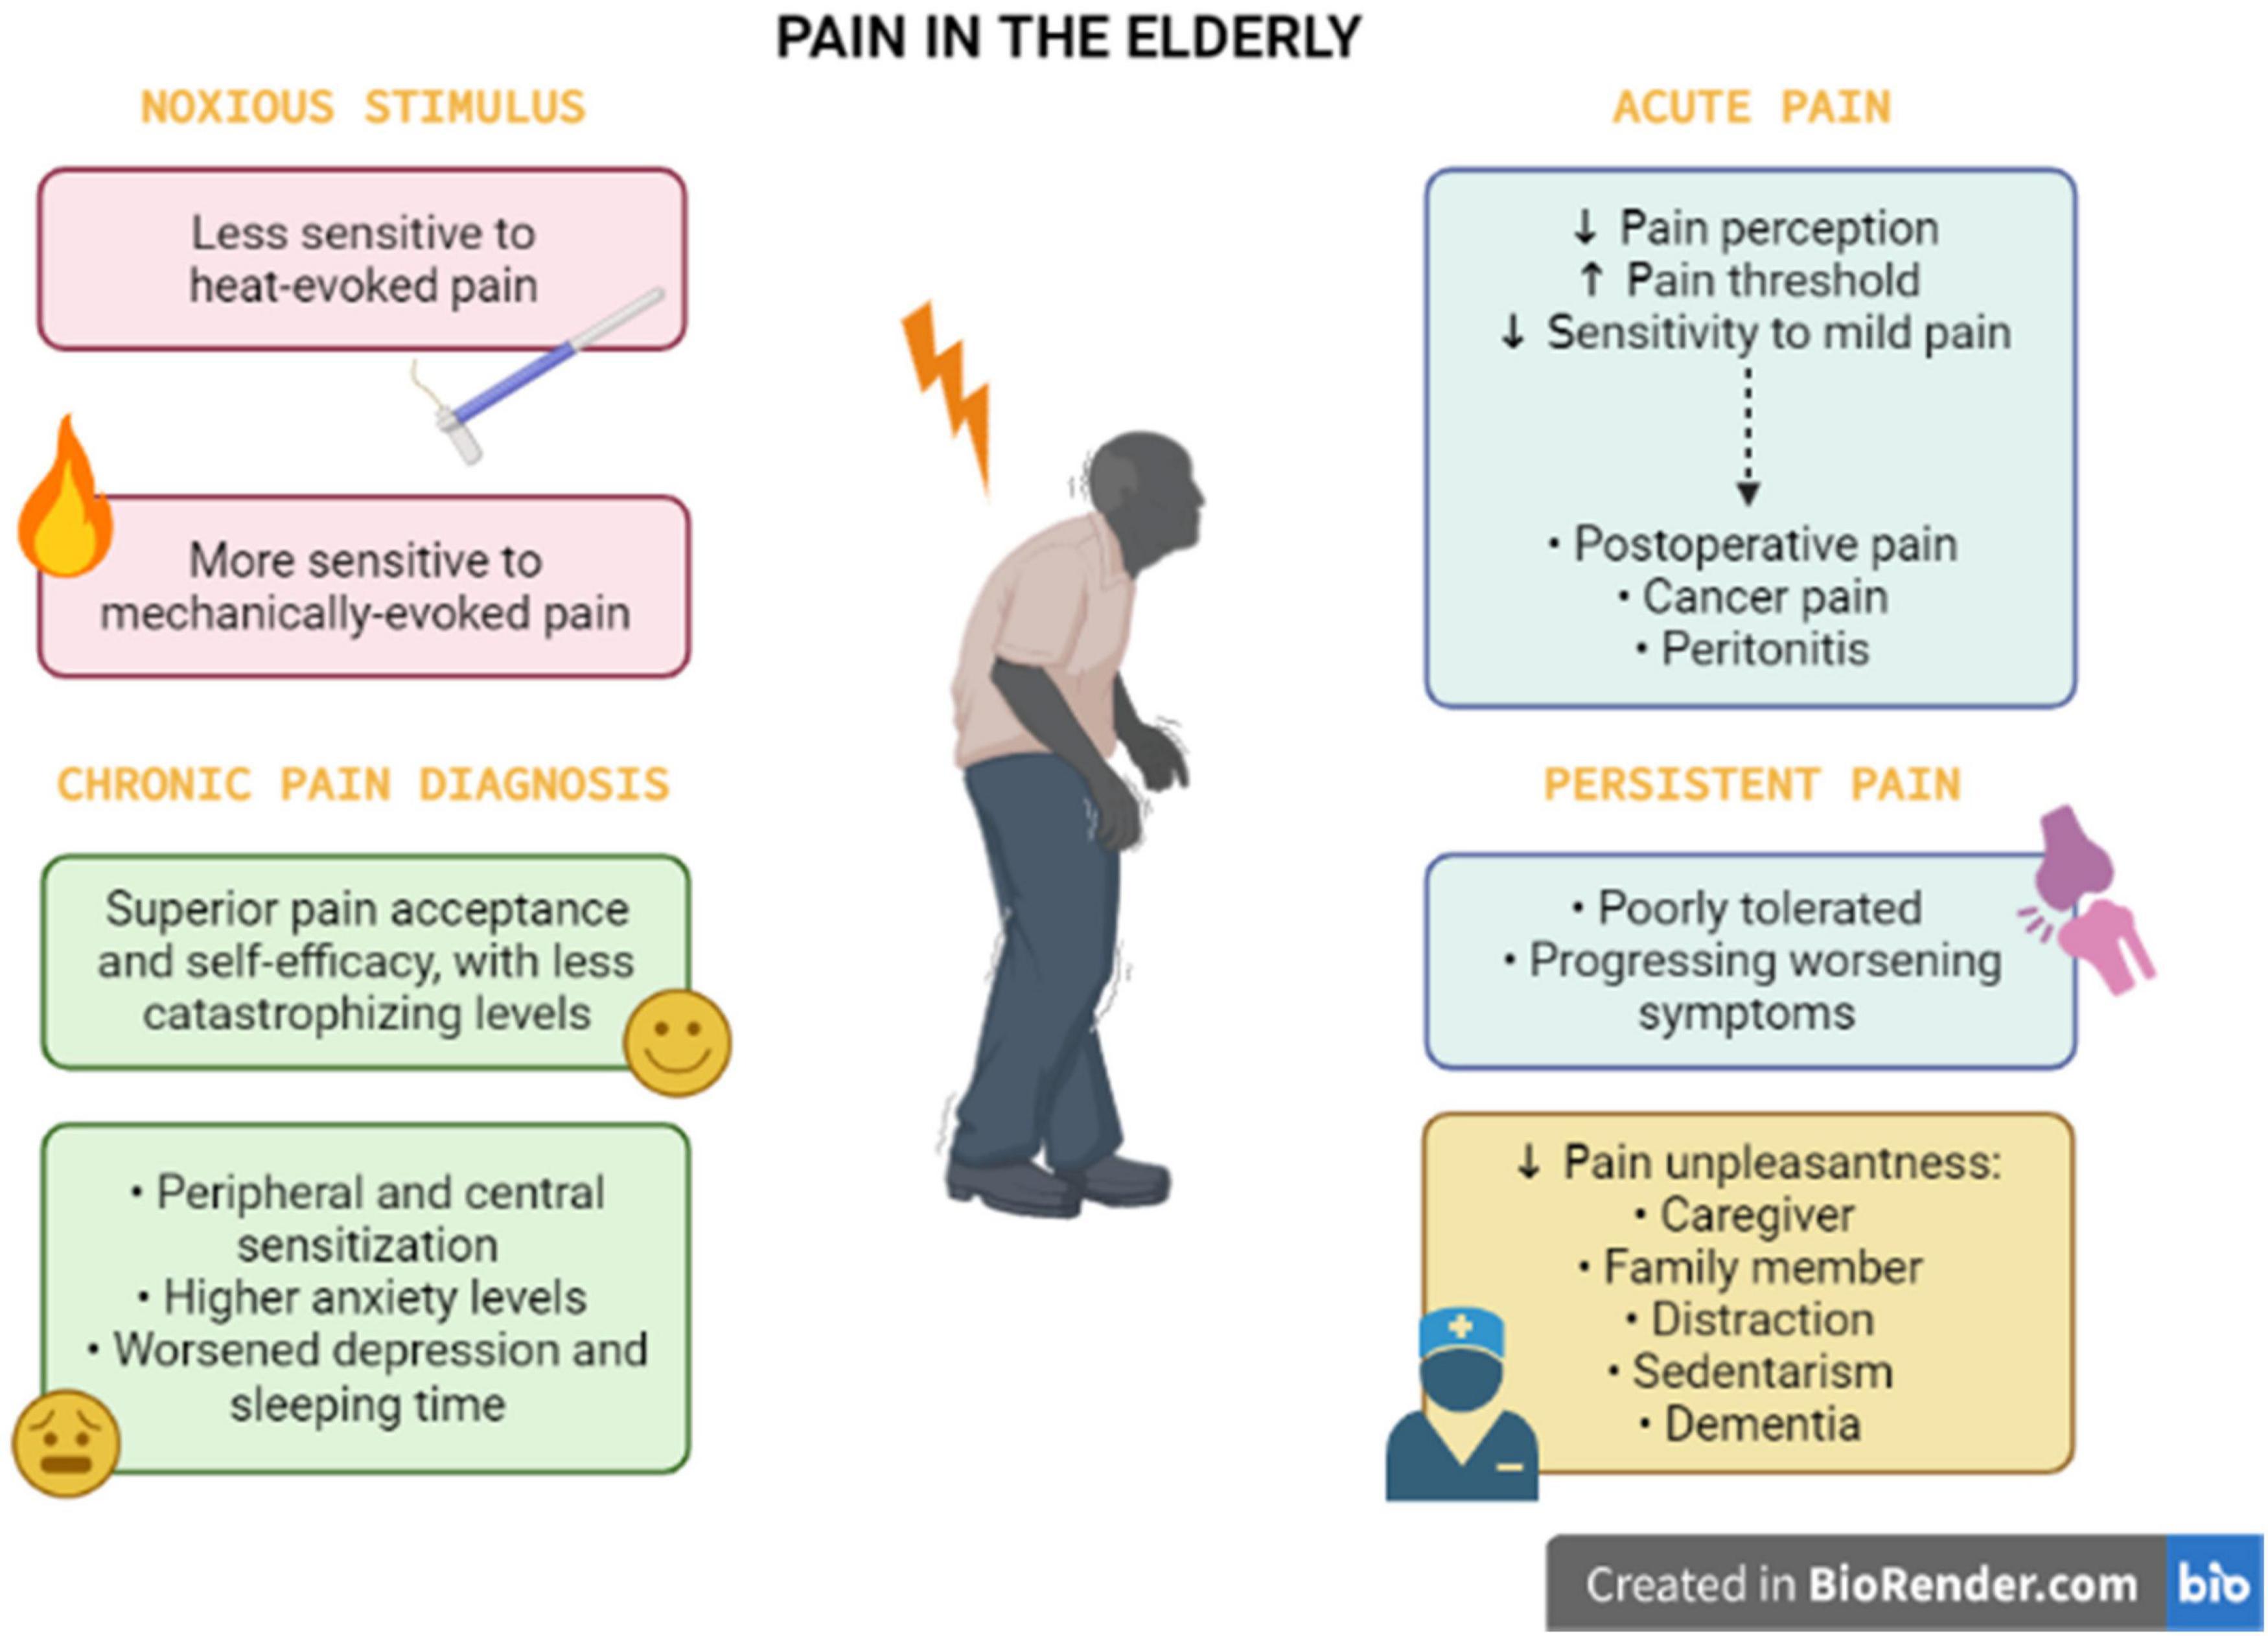 Real-World Retrospective Review of Axial Neck Pain Relief